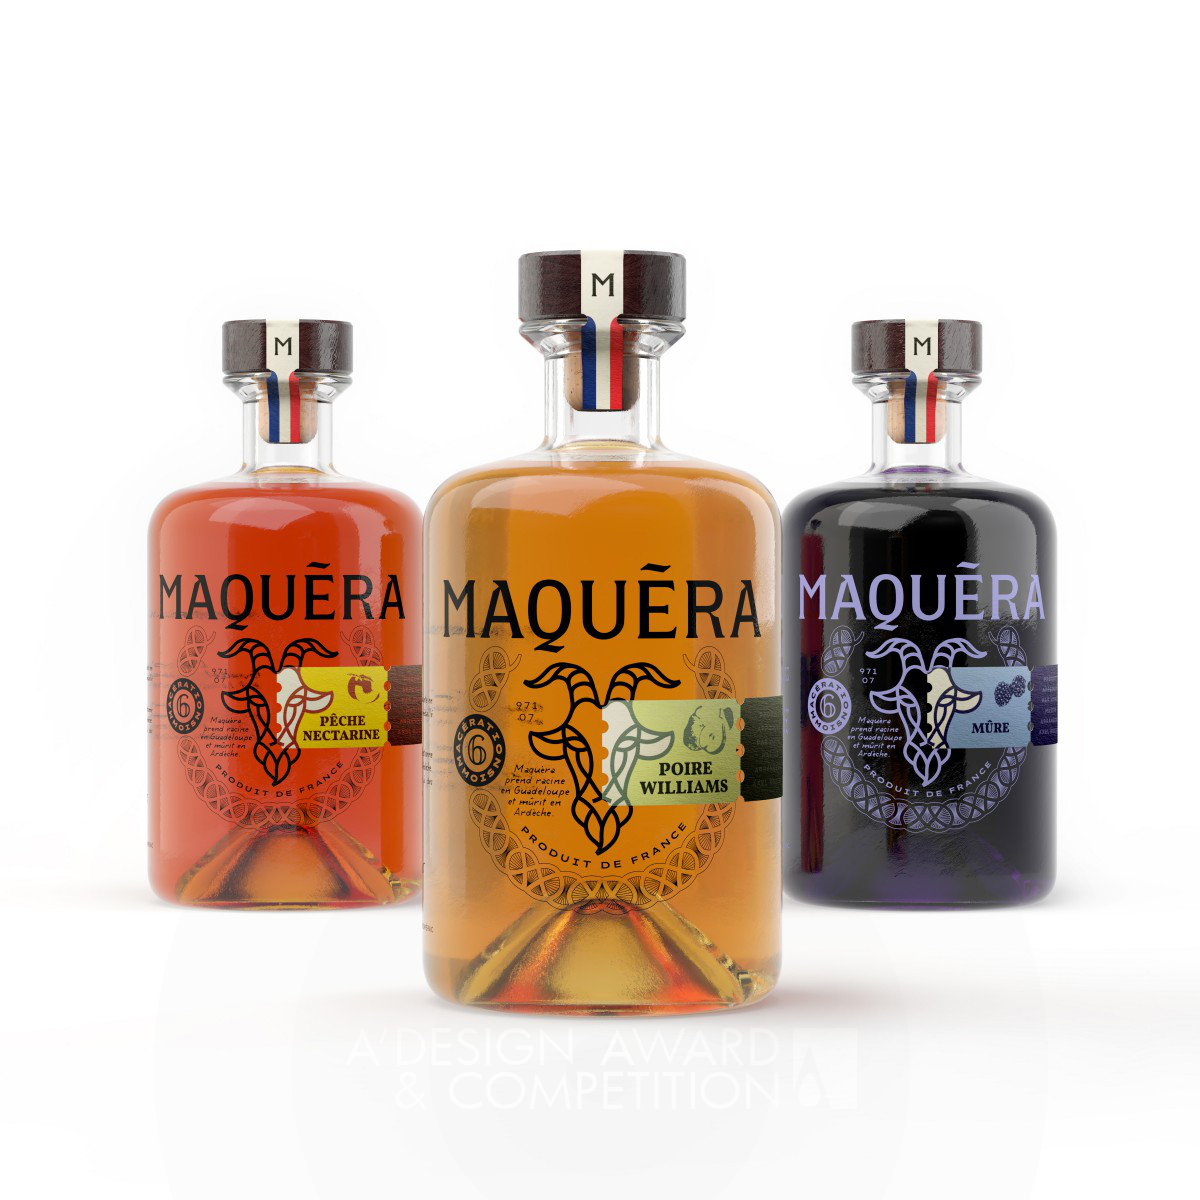 Maquera 50cl Infused Liquor Bottle by Tiravy Guillaume